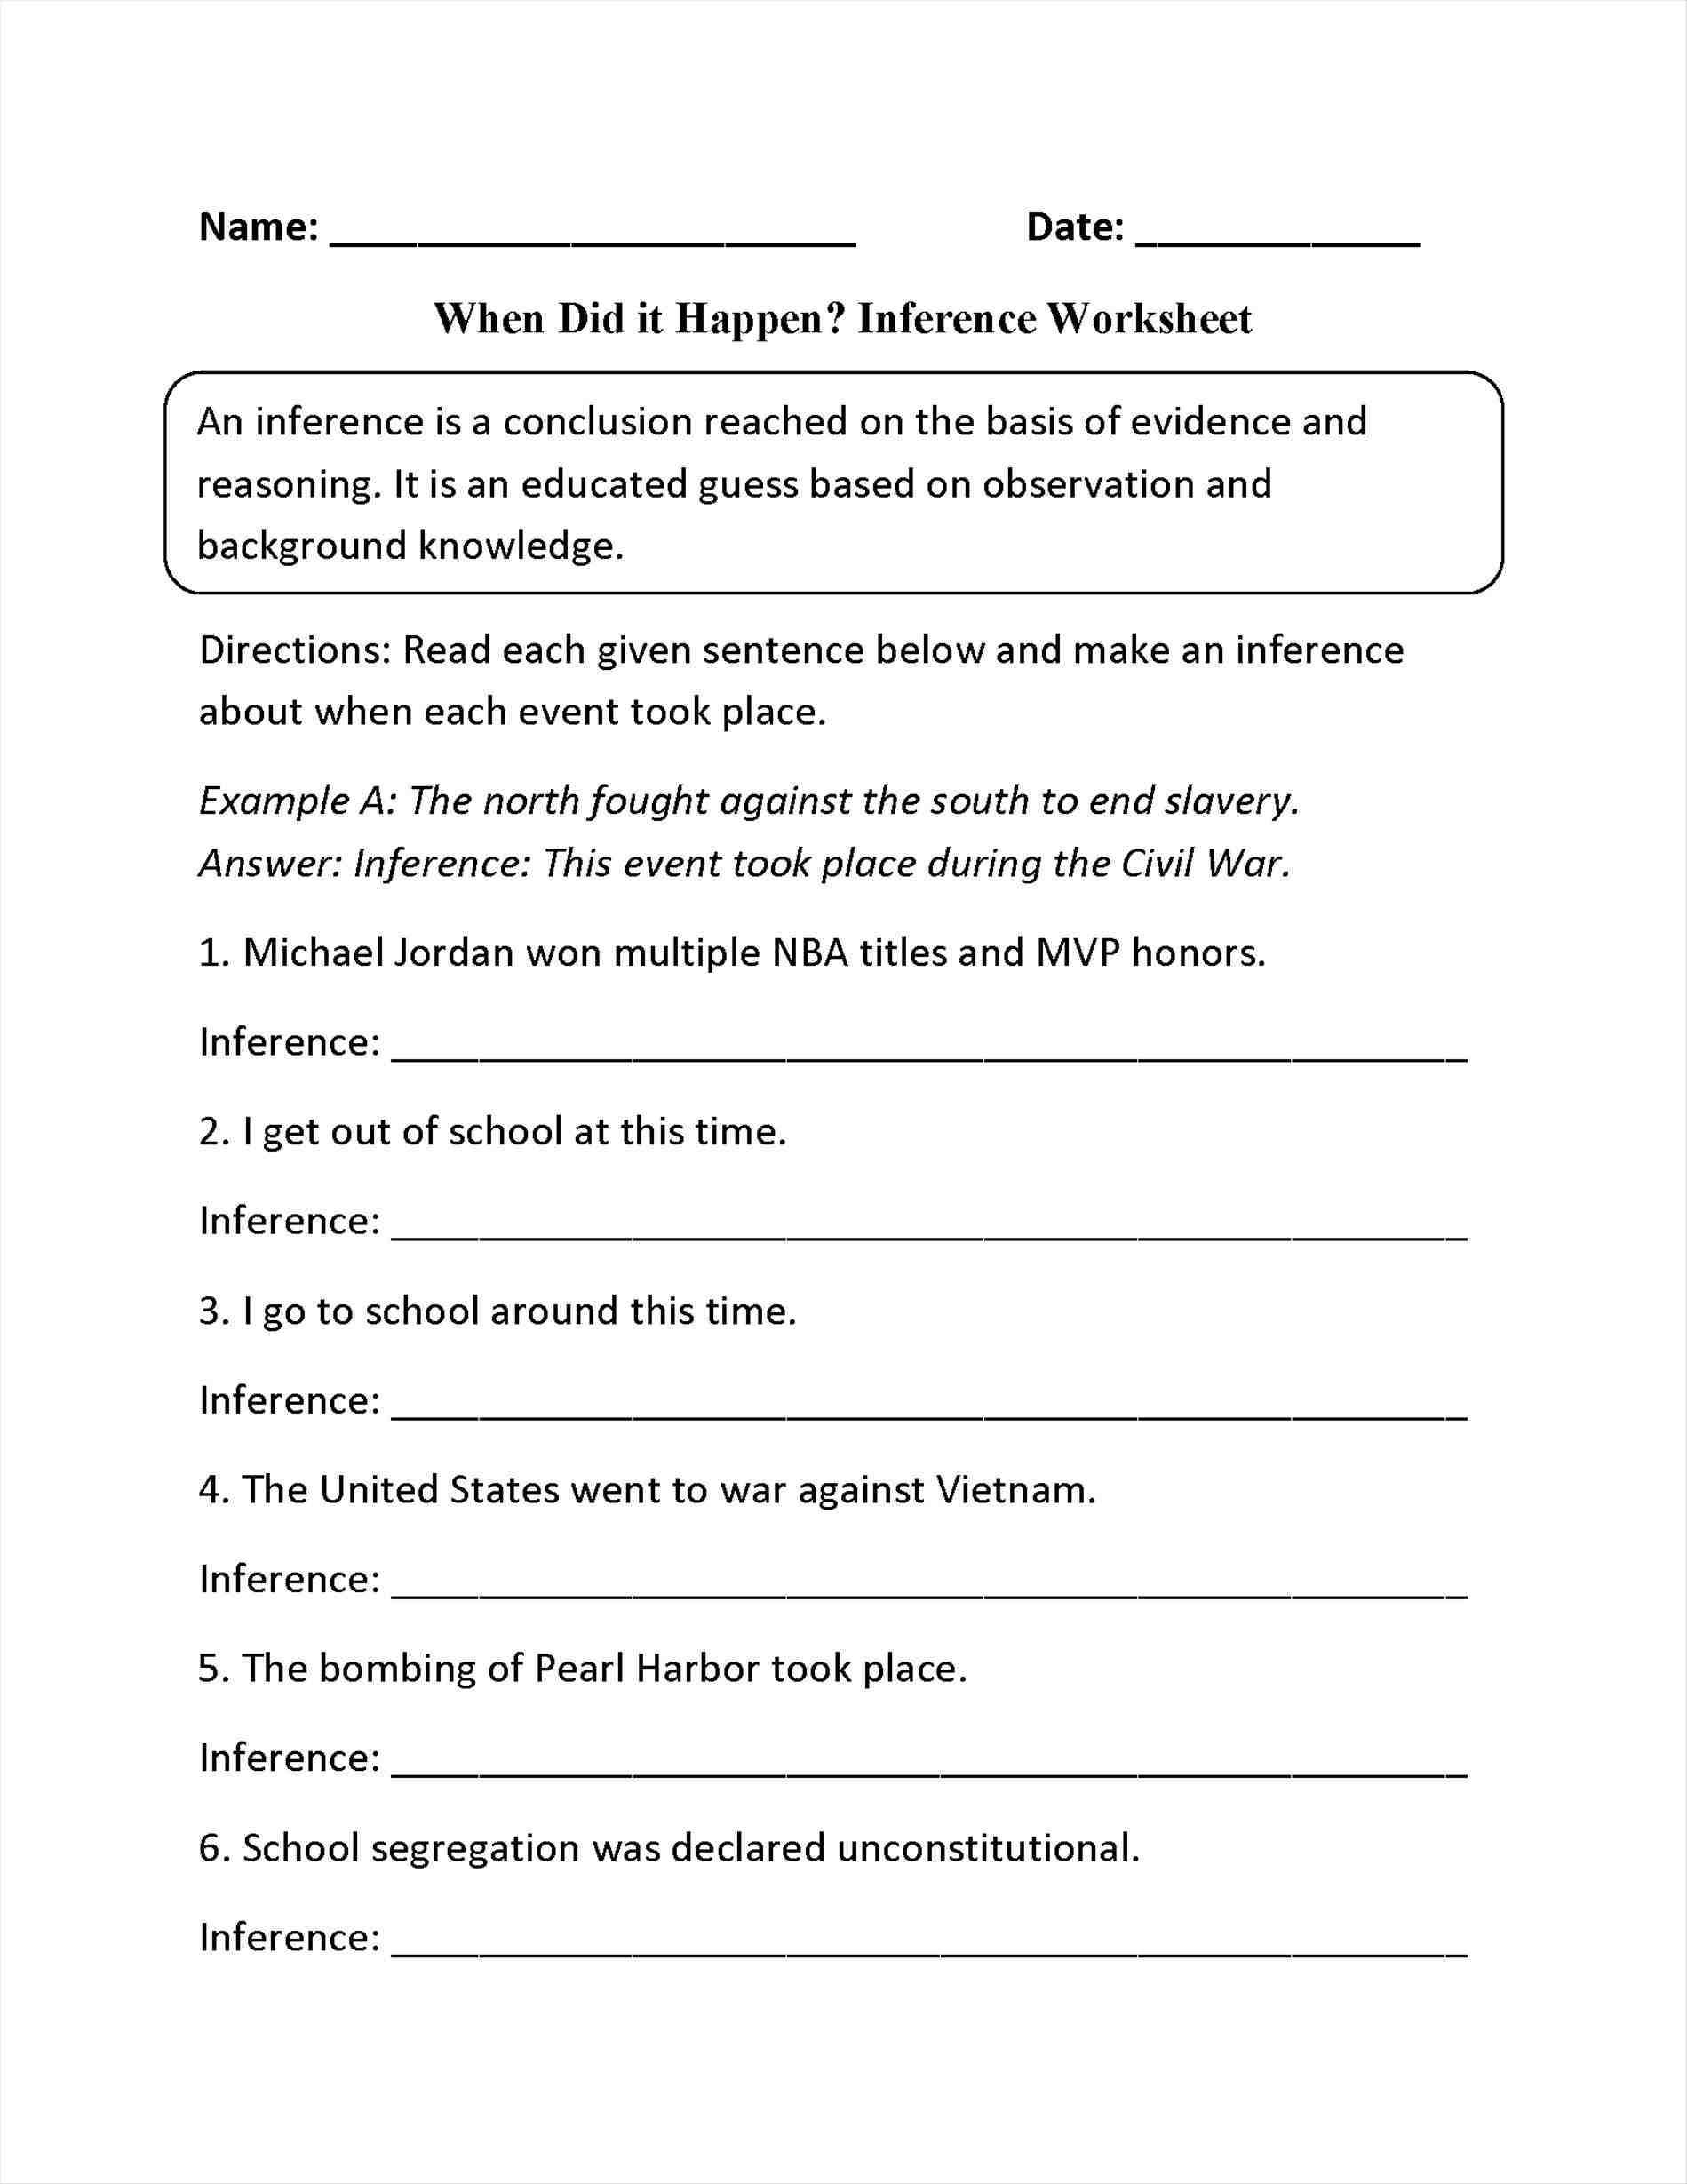 Compare and Contrast Worksheets 2nd Grade as Well as Drawing Conclusions Worksheets Middle School Gallery Worksheet for